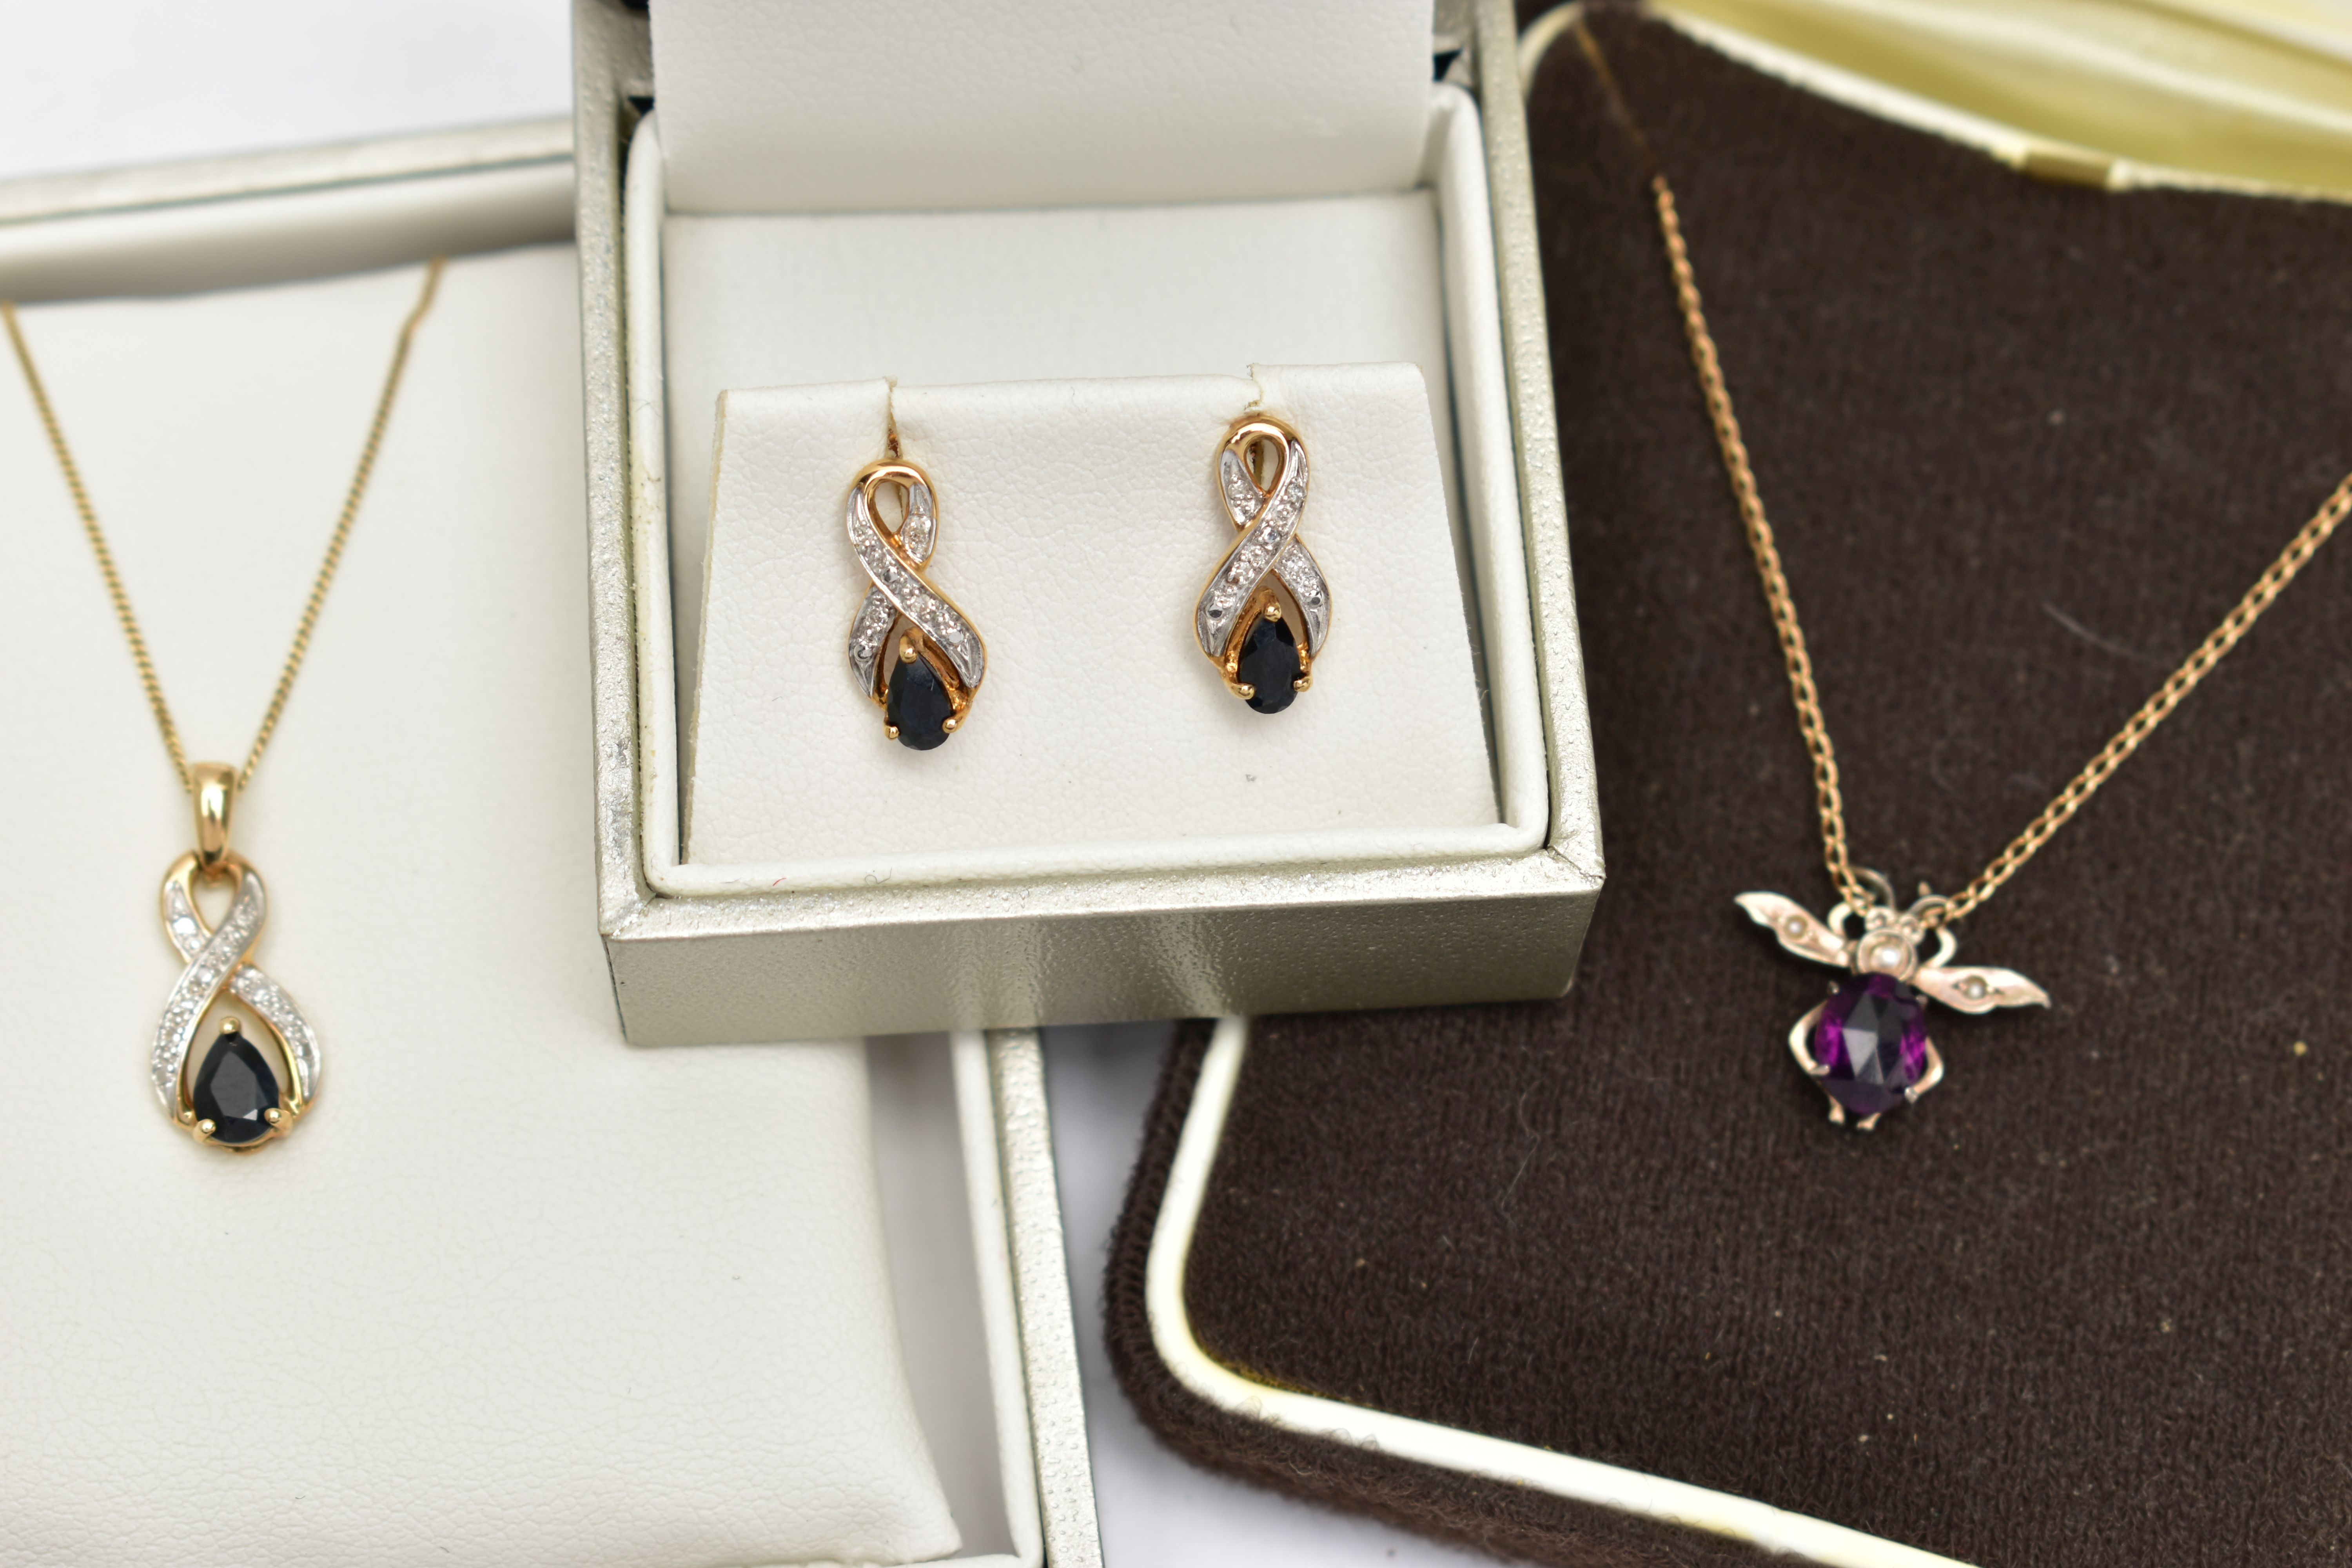 A 9CT YELLOW GOLD SAPPHIRE AND DIAMOND NECKLACE AND EARRING SET, TOGETHER WITH A PASTE BUG PENDANT